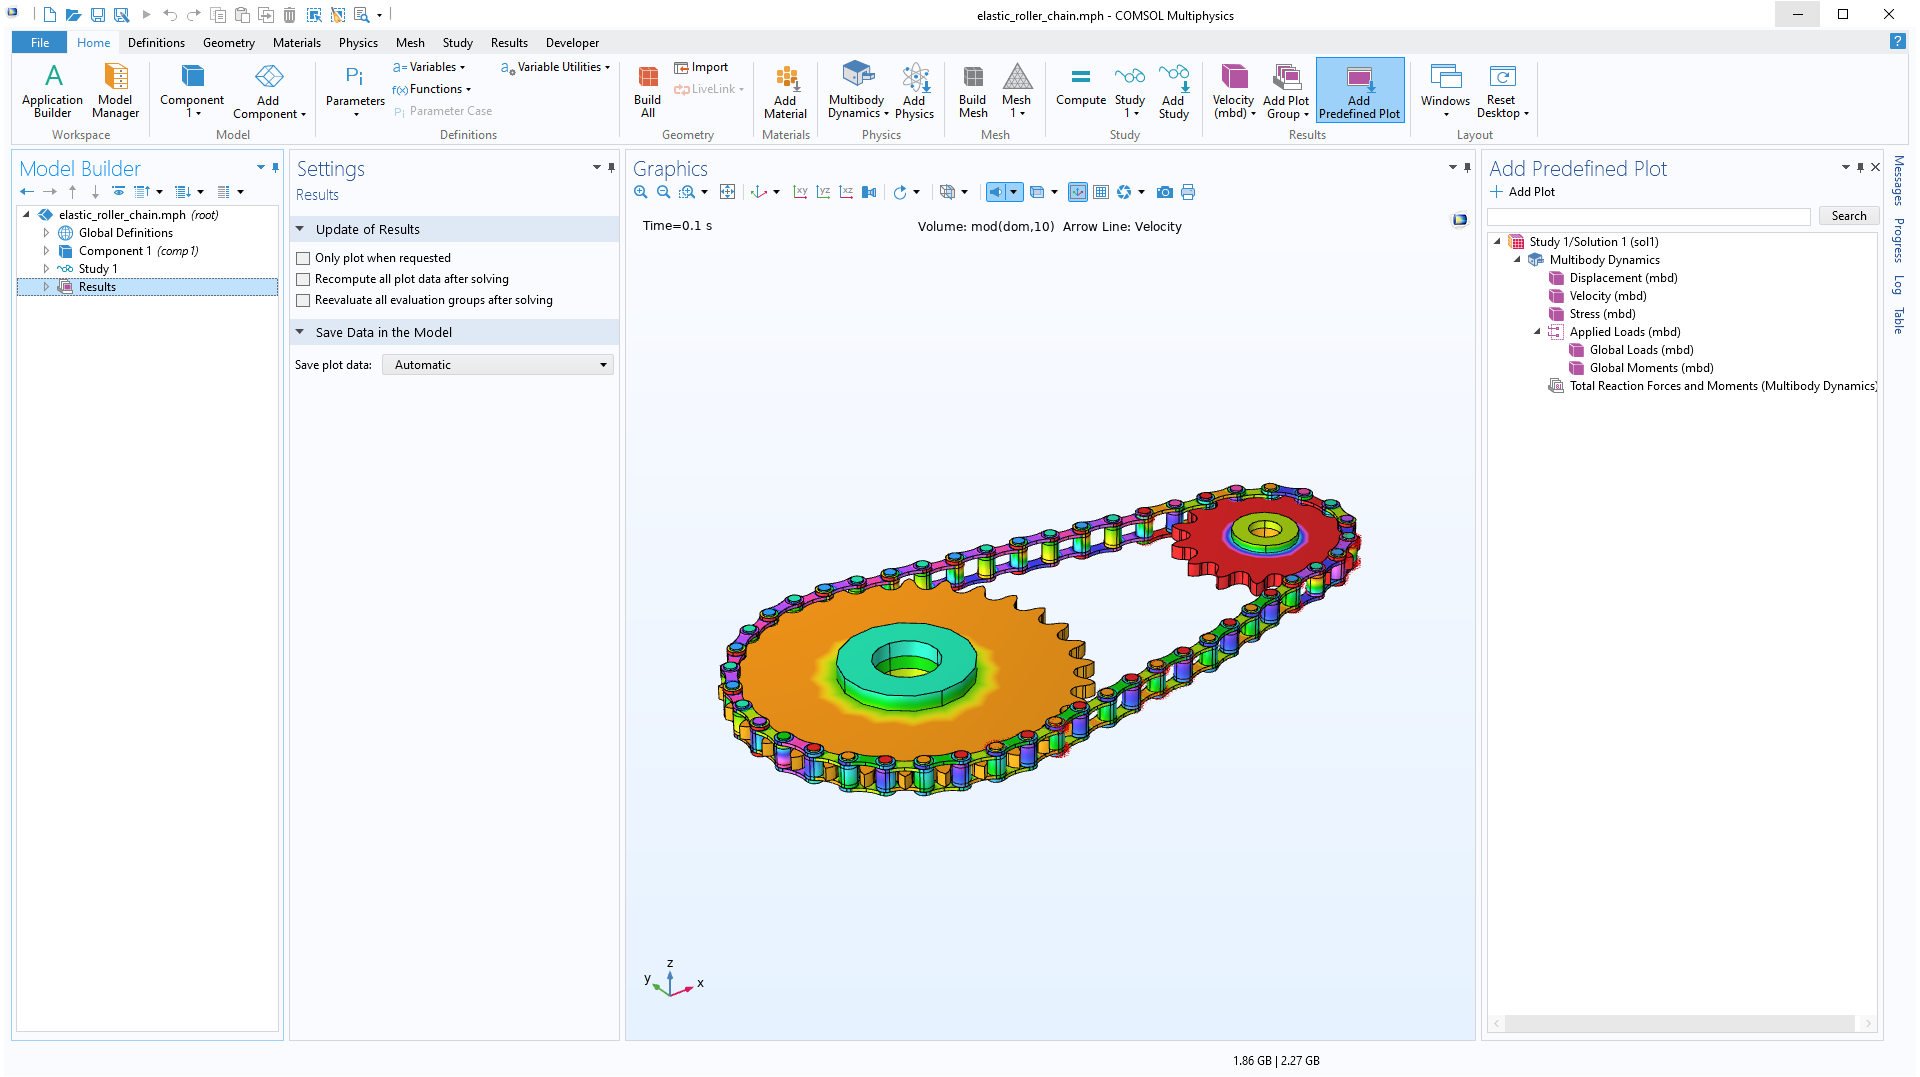 The COMSOL Multiphysics UI showing the Model Builder with the Results node highlighted, the corresponding Settings window, an elastic roller chain model in the Graphics window, and the Add Predefined Plot window opened on the right.